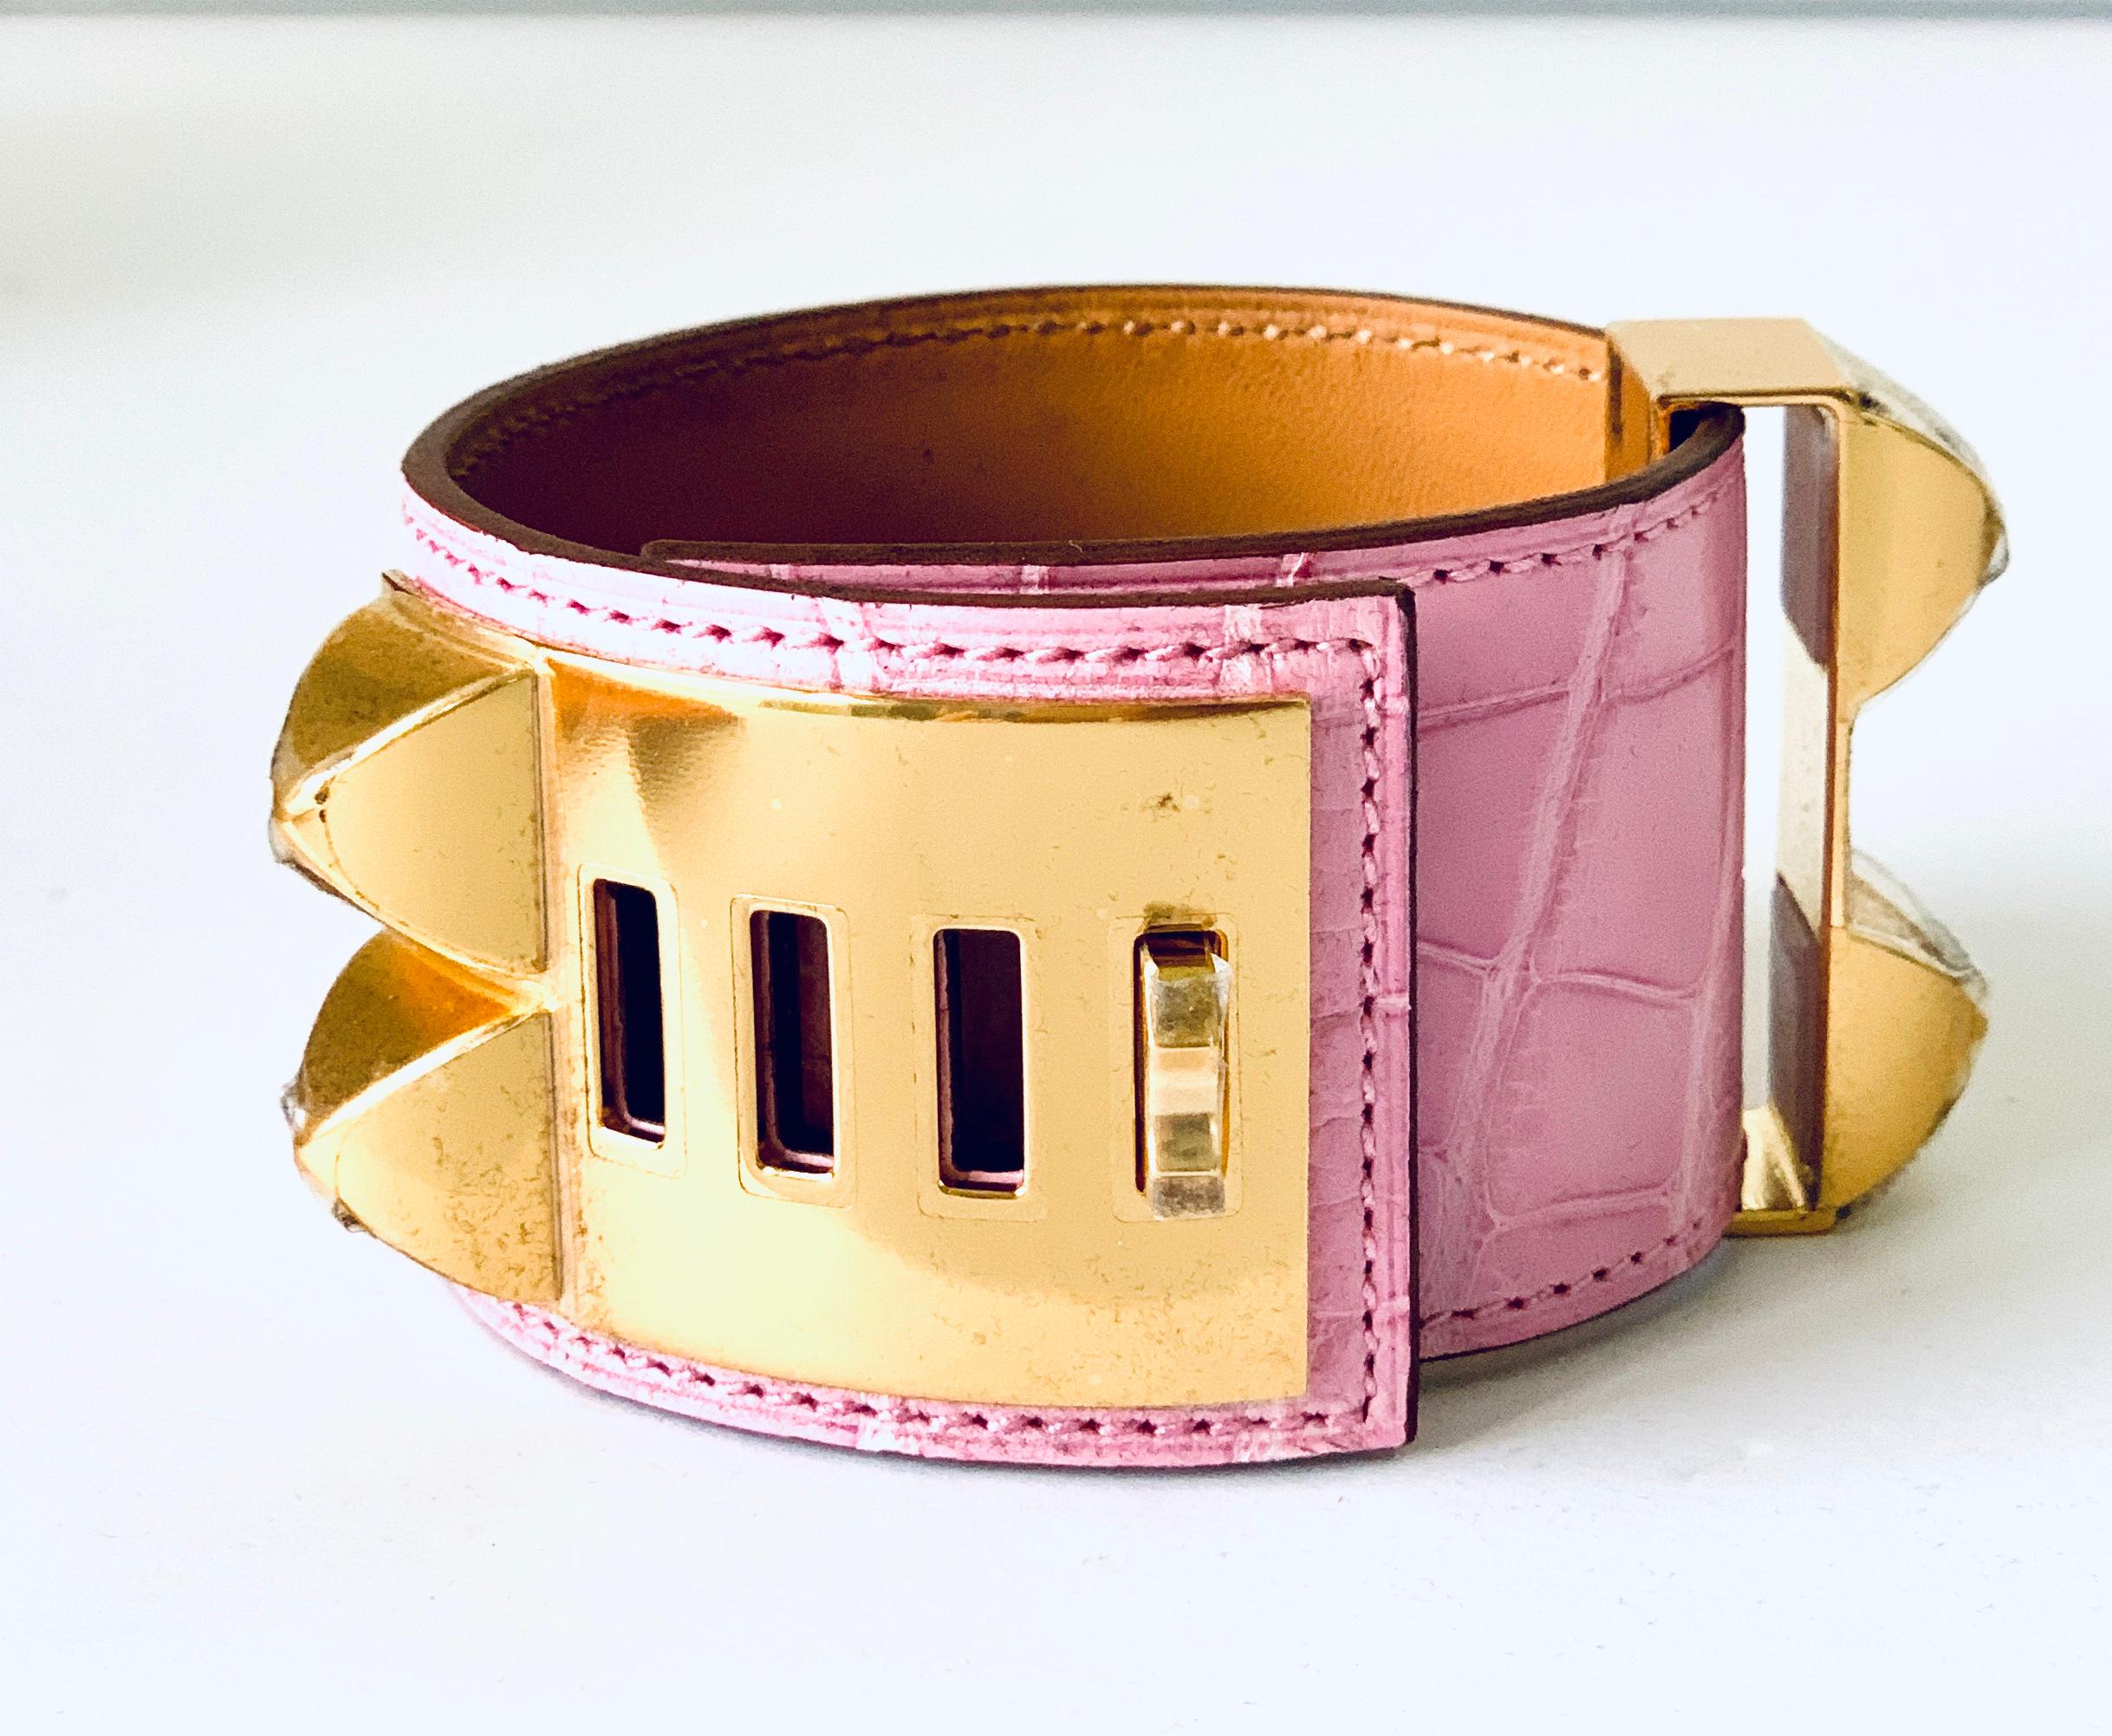 Hermes bracelet in Bubblegum pink Alligator
Size is T2 
Plastic on all the hardware
Scales are beautiful
Hermes Velvet Dustcover, shopping bag, box, ribbon all included
Make a statement with this Chic CDC
This color is very rare!!
